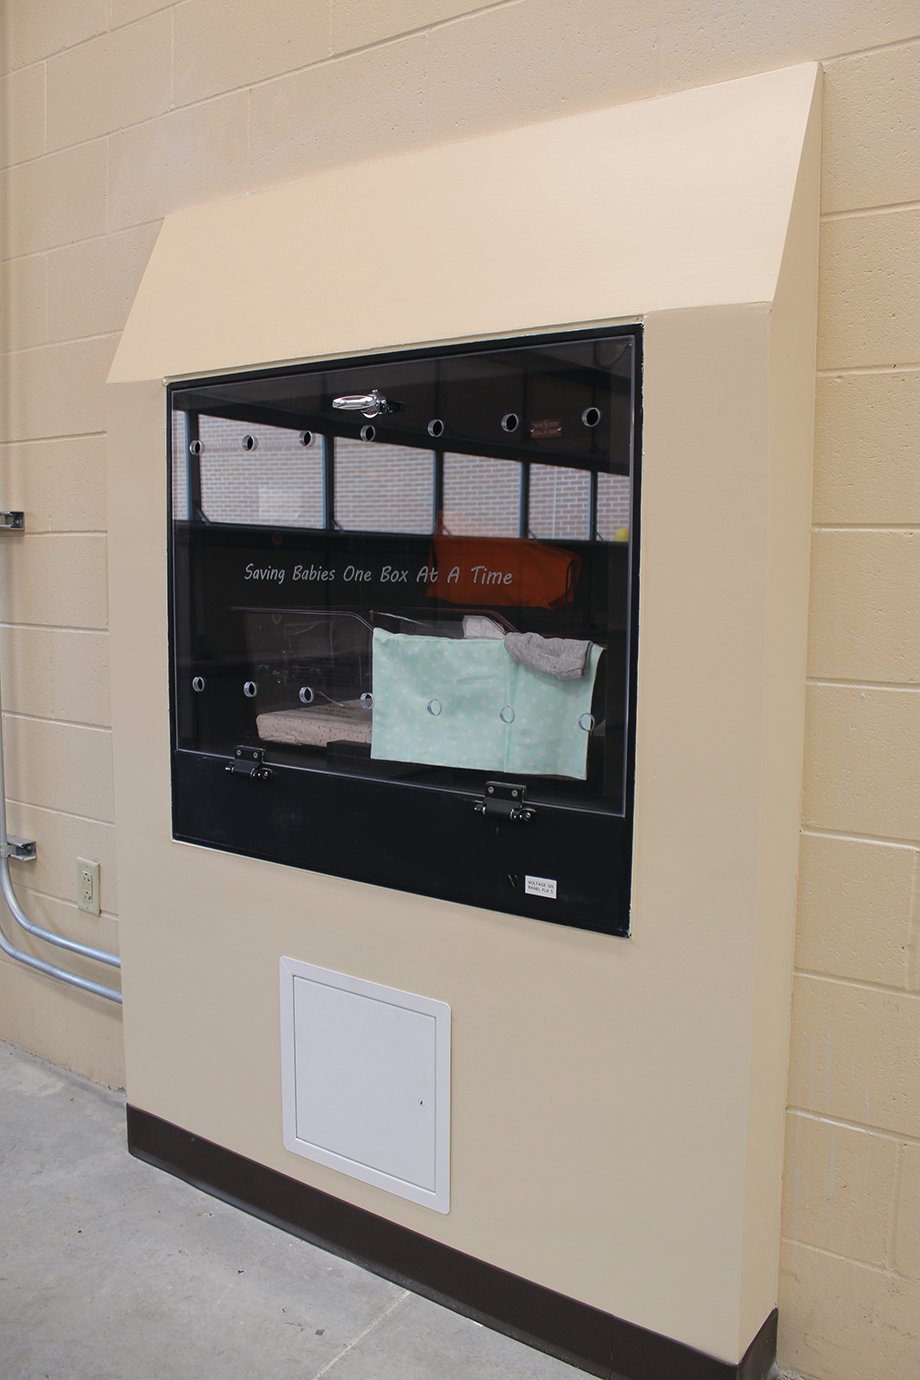 The interior of the new Safe Haven baby box at Franciscan Health Crawfordsville features a clear cover and a constant temperature between 75 and 79 degrees, as well as blankets and other child products designed to make a baby comfortable.